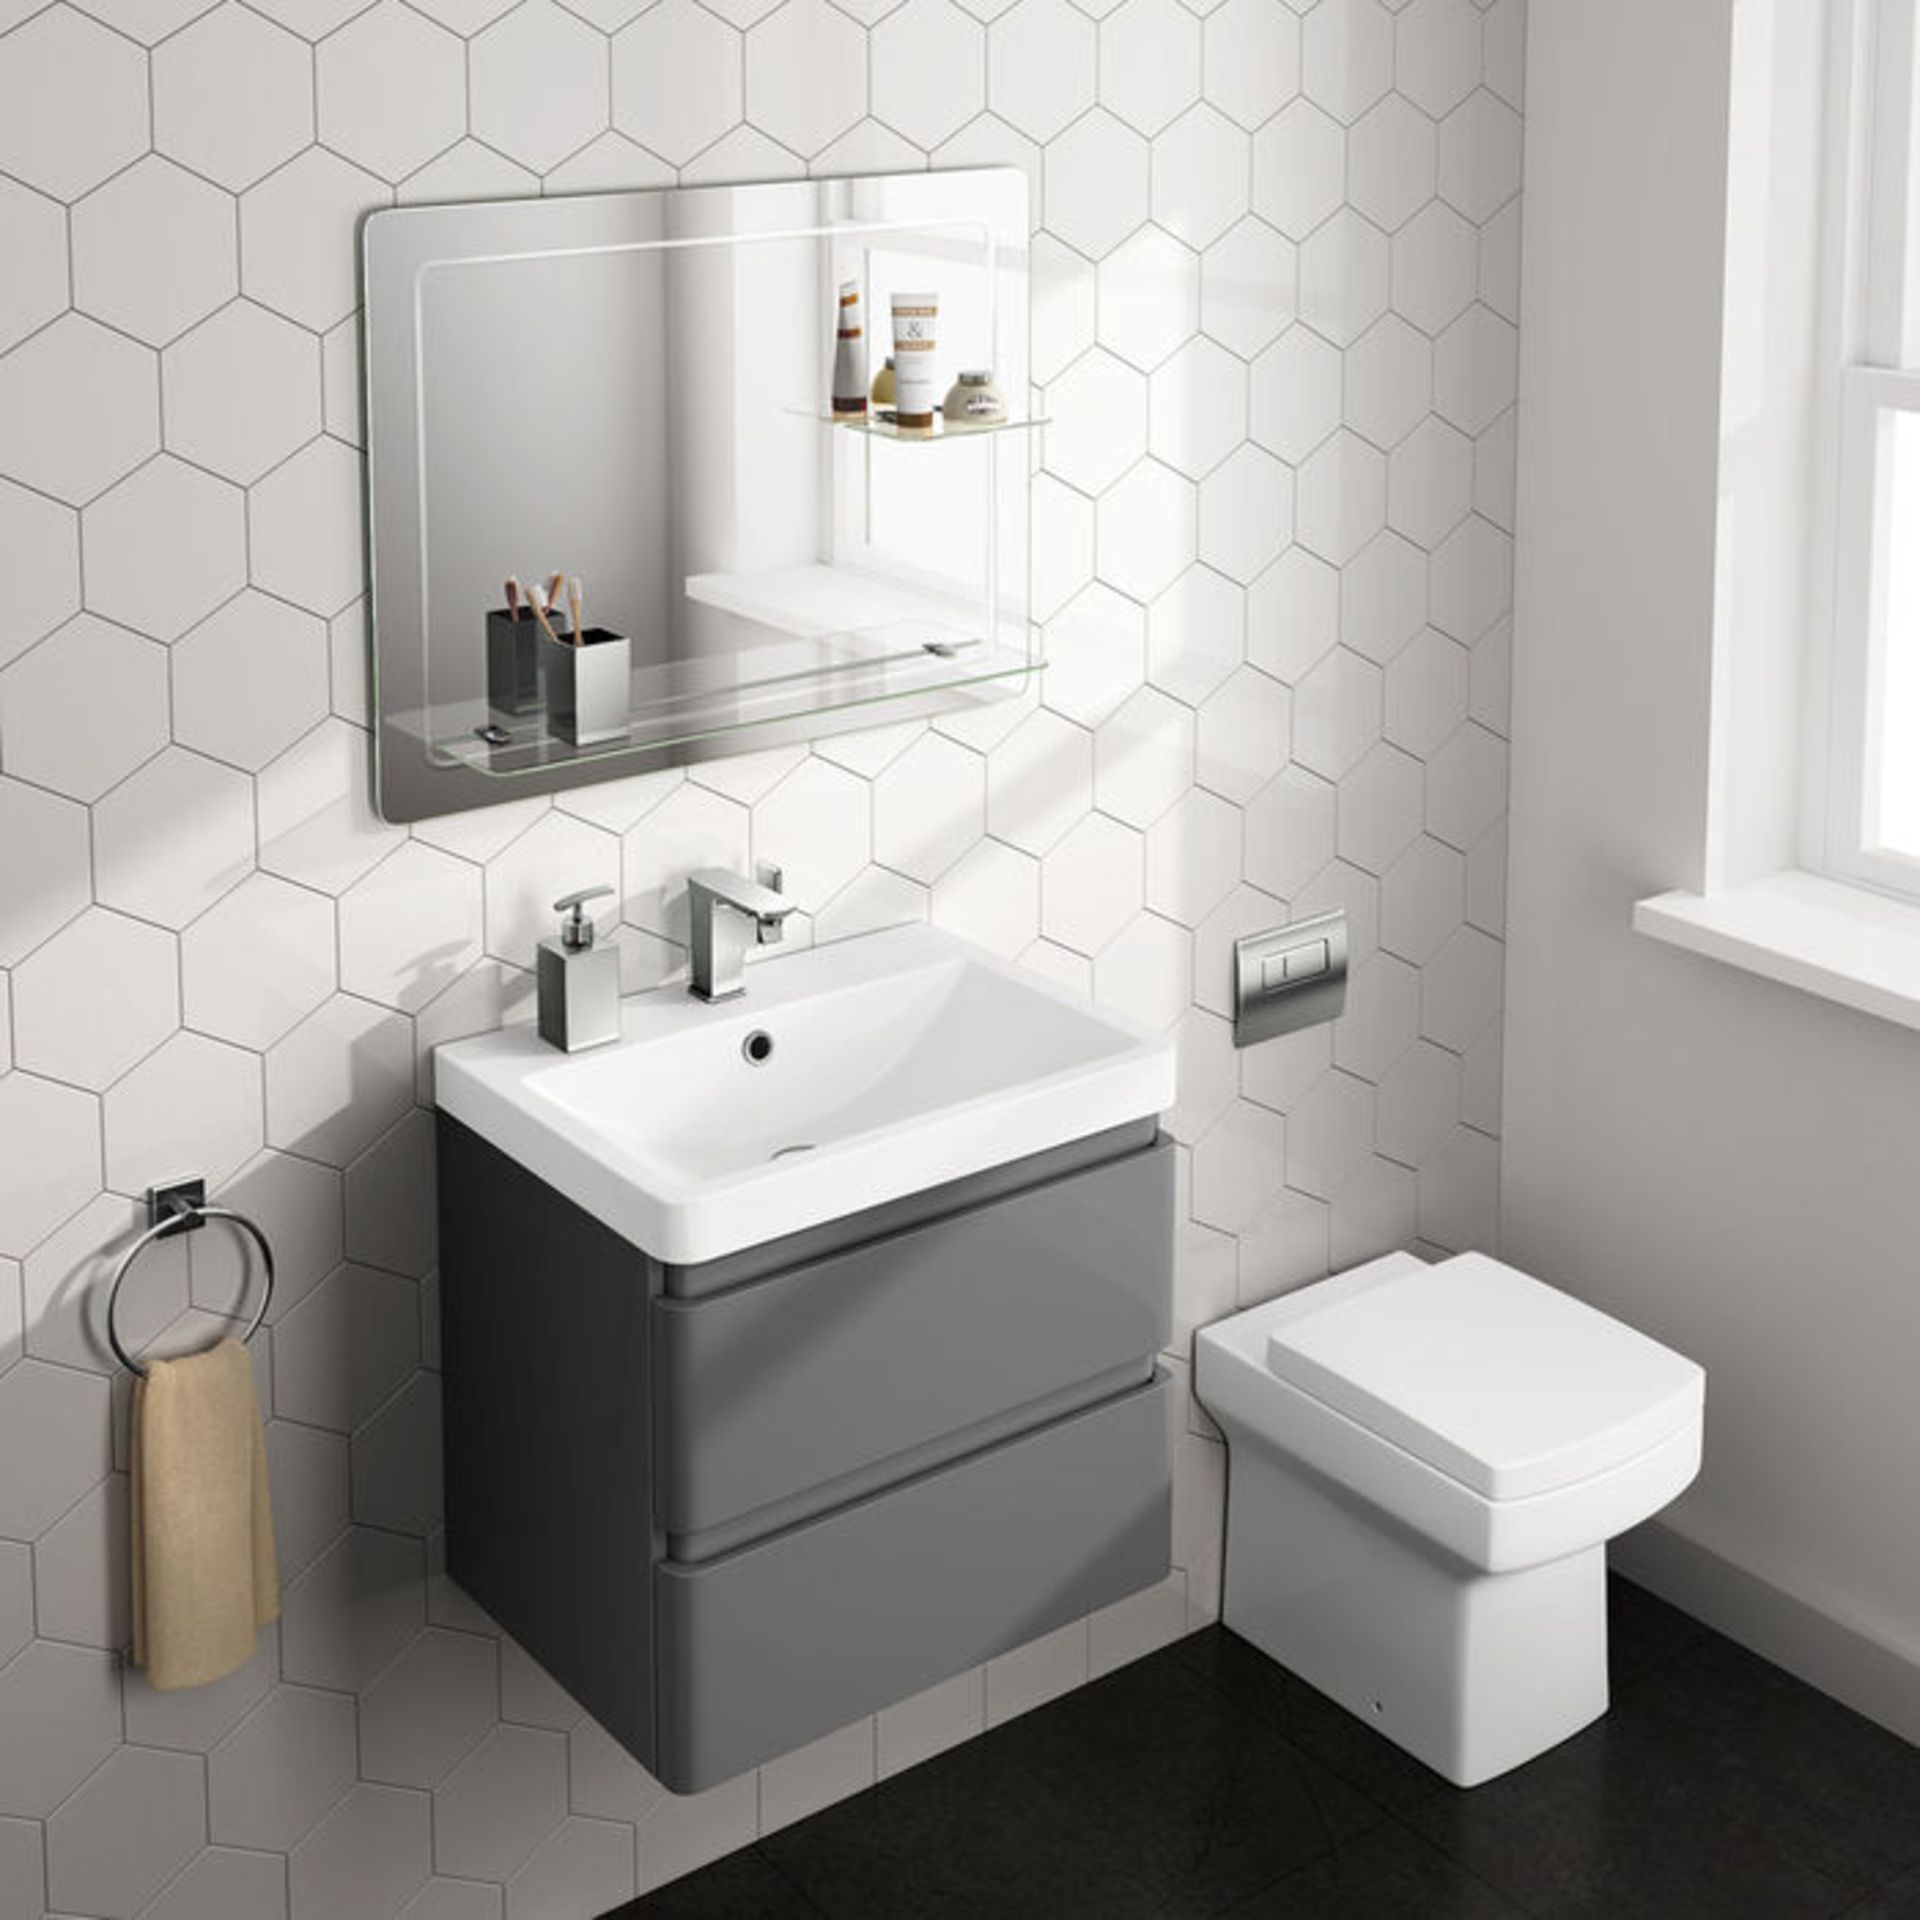 (ZA182) 800x600mm Loxely Mirror & Shelf. Smooth beveled edge for additional safety and style Two - Image 2 of 3